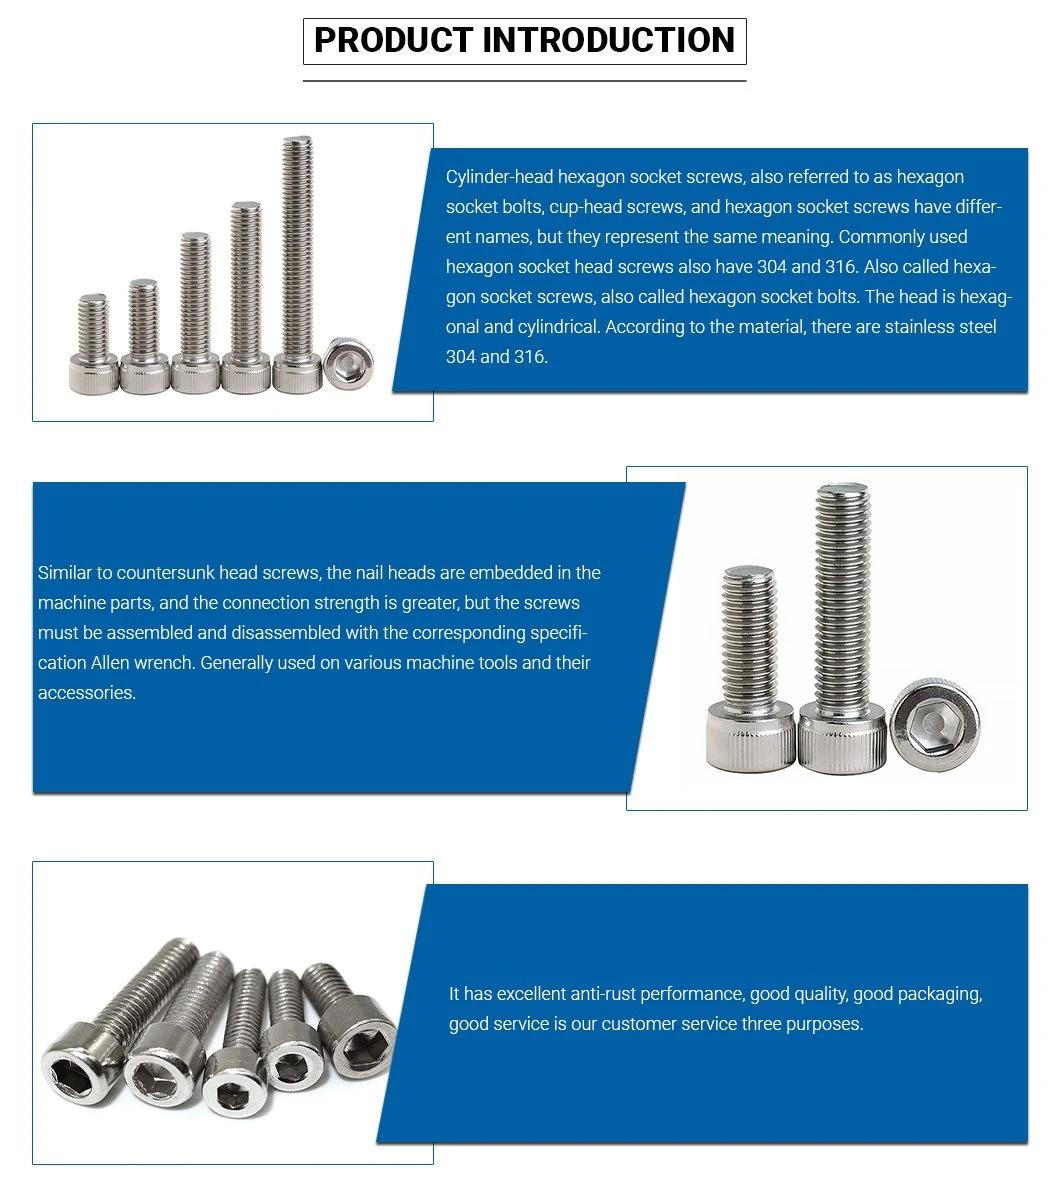 Full Thread Stainless Steel 316 Bolts and Nuts Bolt